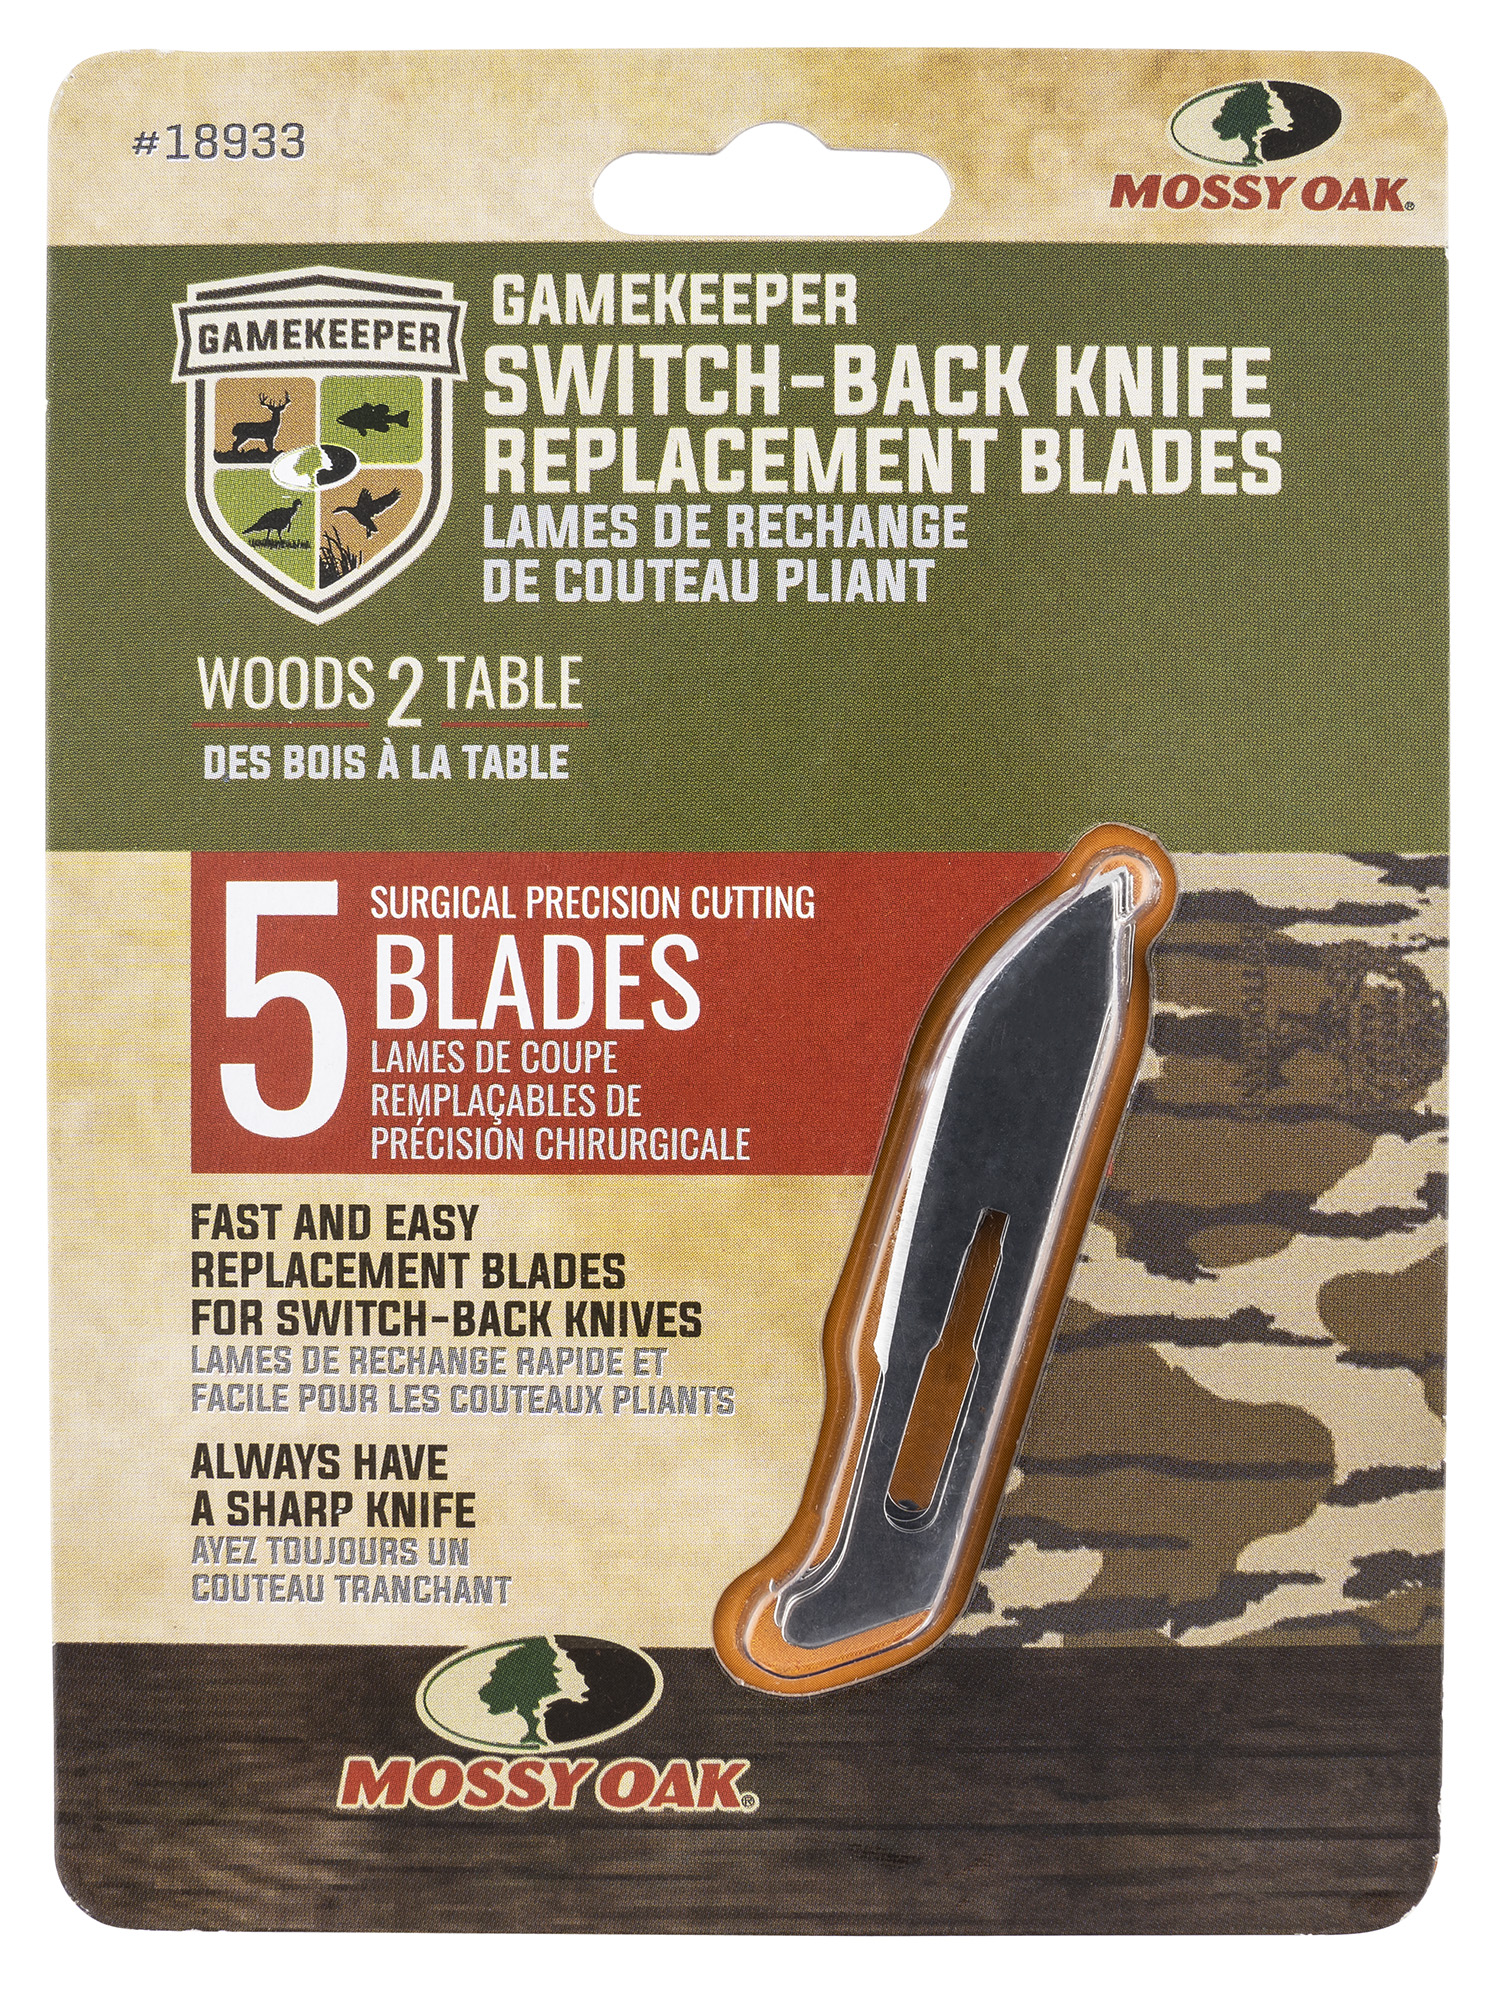 Mossy Oak GameKeeper 18933 Gamekeeper Replacement Blades Switch-Back 5.50  Assorted Metals Blade Stainless 5 Blades - White Birch Armory